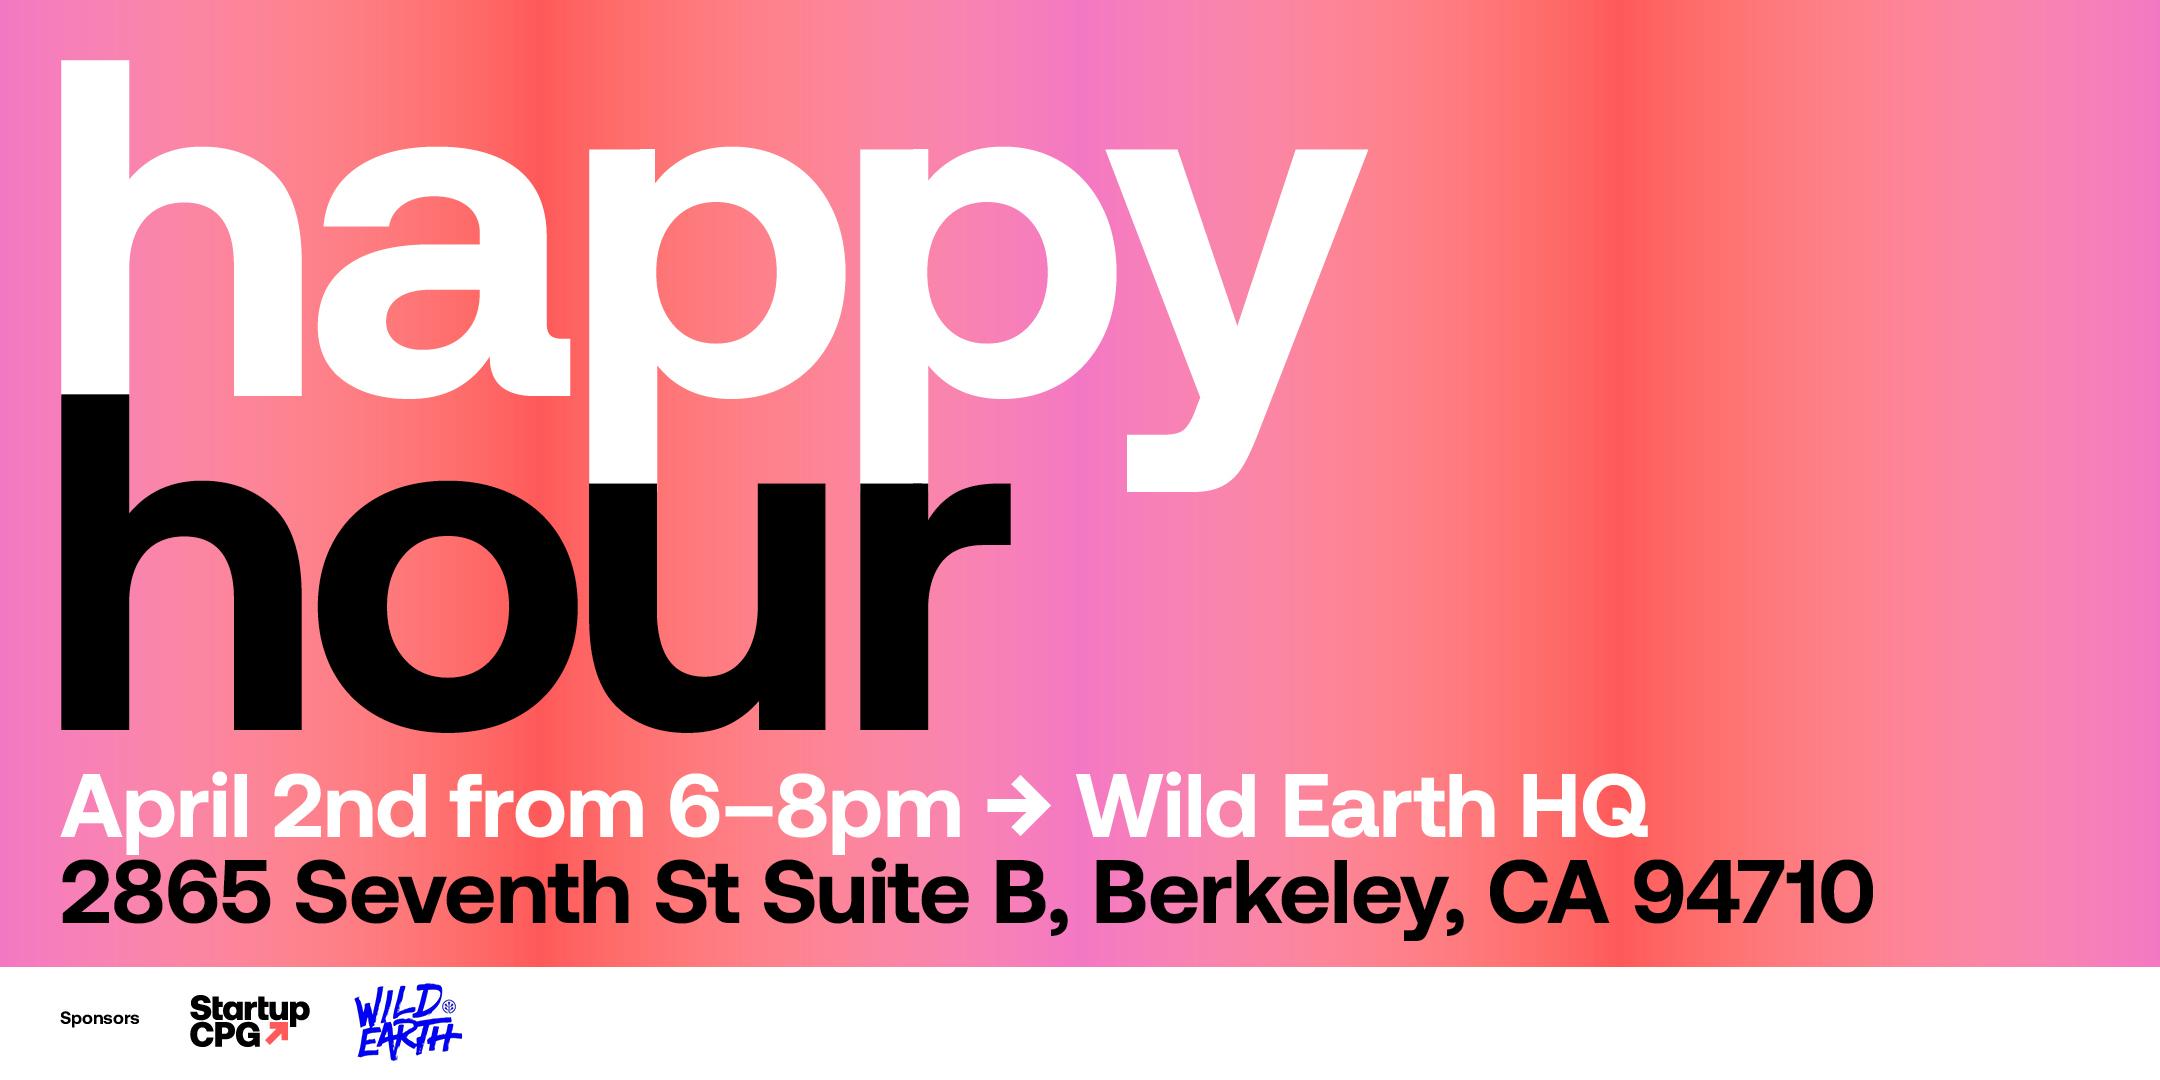 Startup CPG / Wild Earth Happy Hour